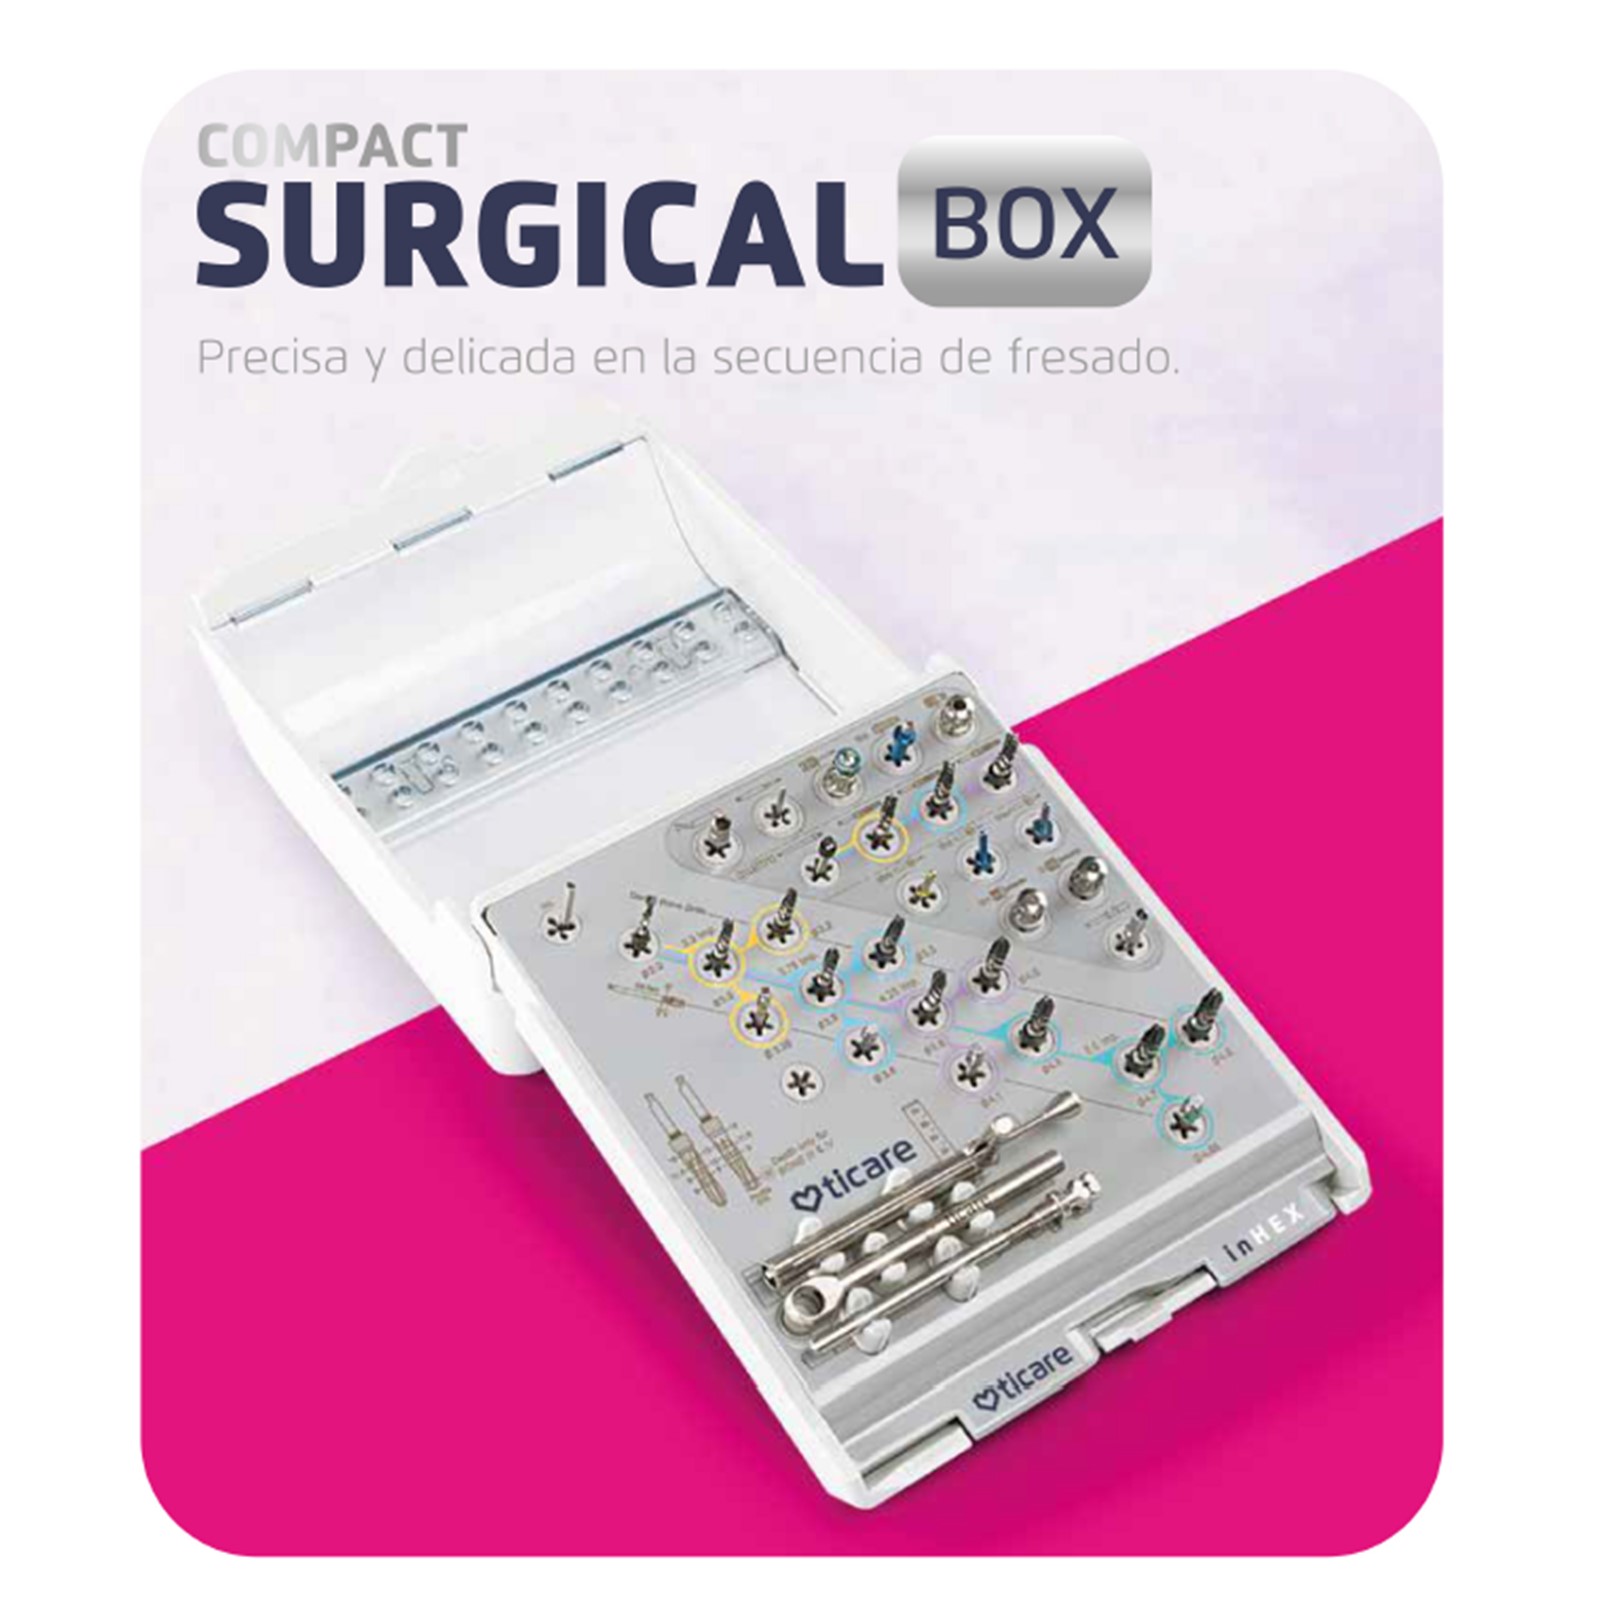 Compact Surgical Box